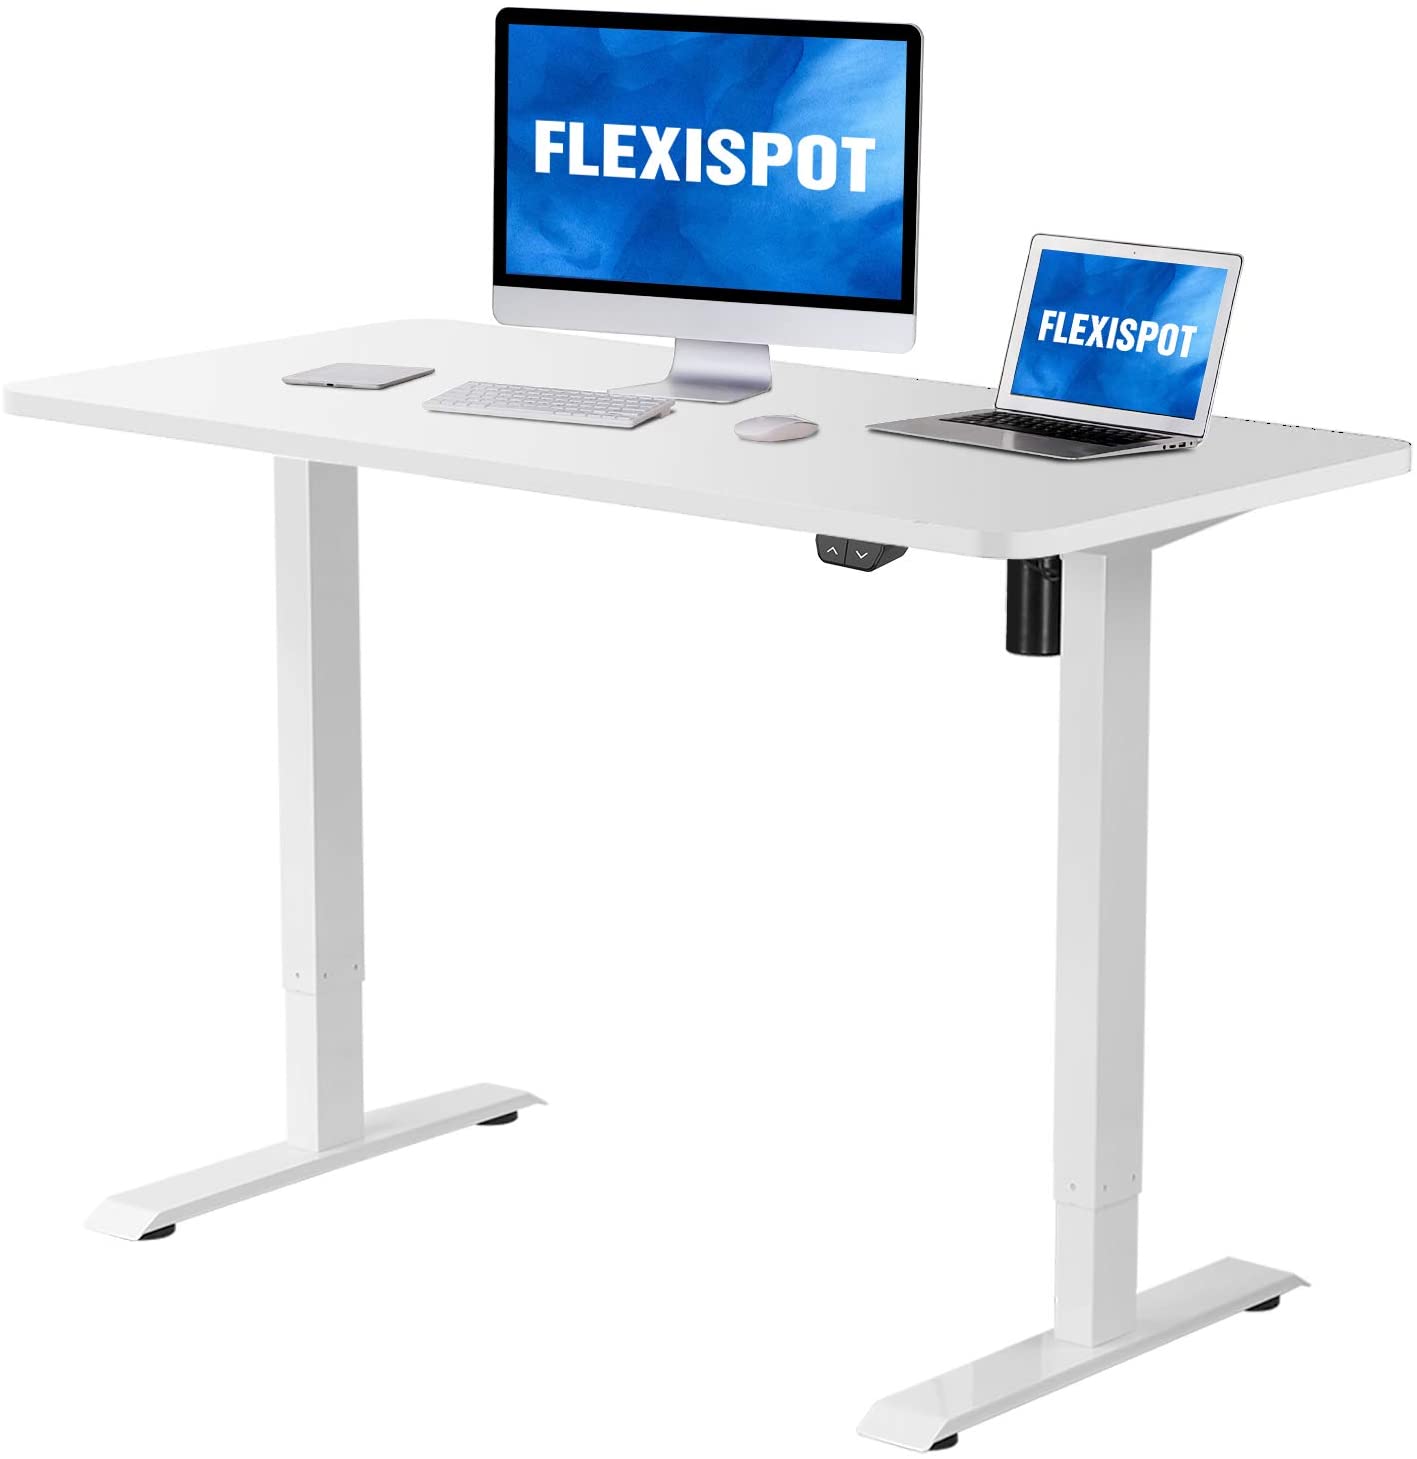 Review of Flexispot Electric Standing Desk Height Adjustable Desk, 48 x 30 Inches Sit Stand Desk